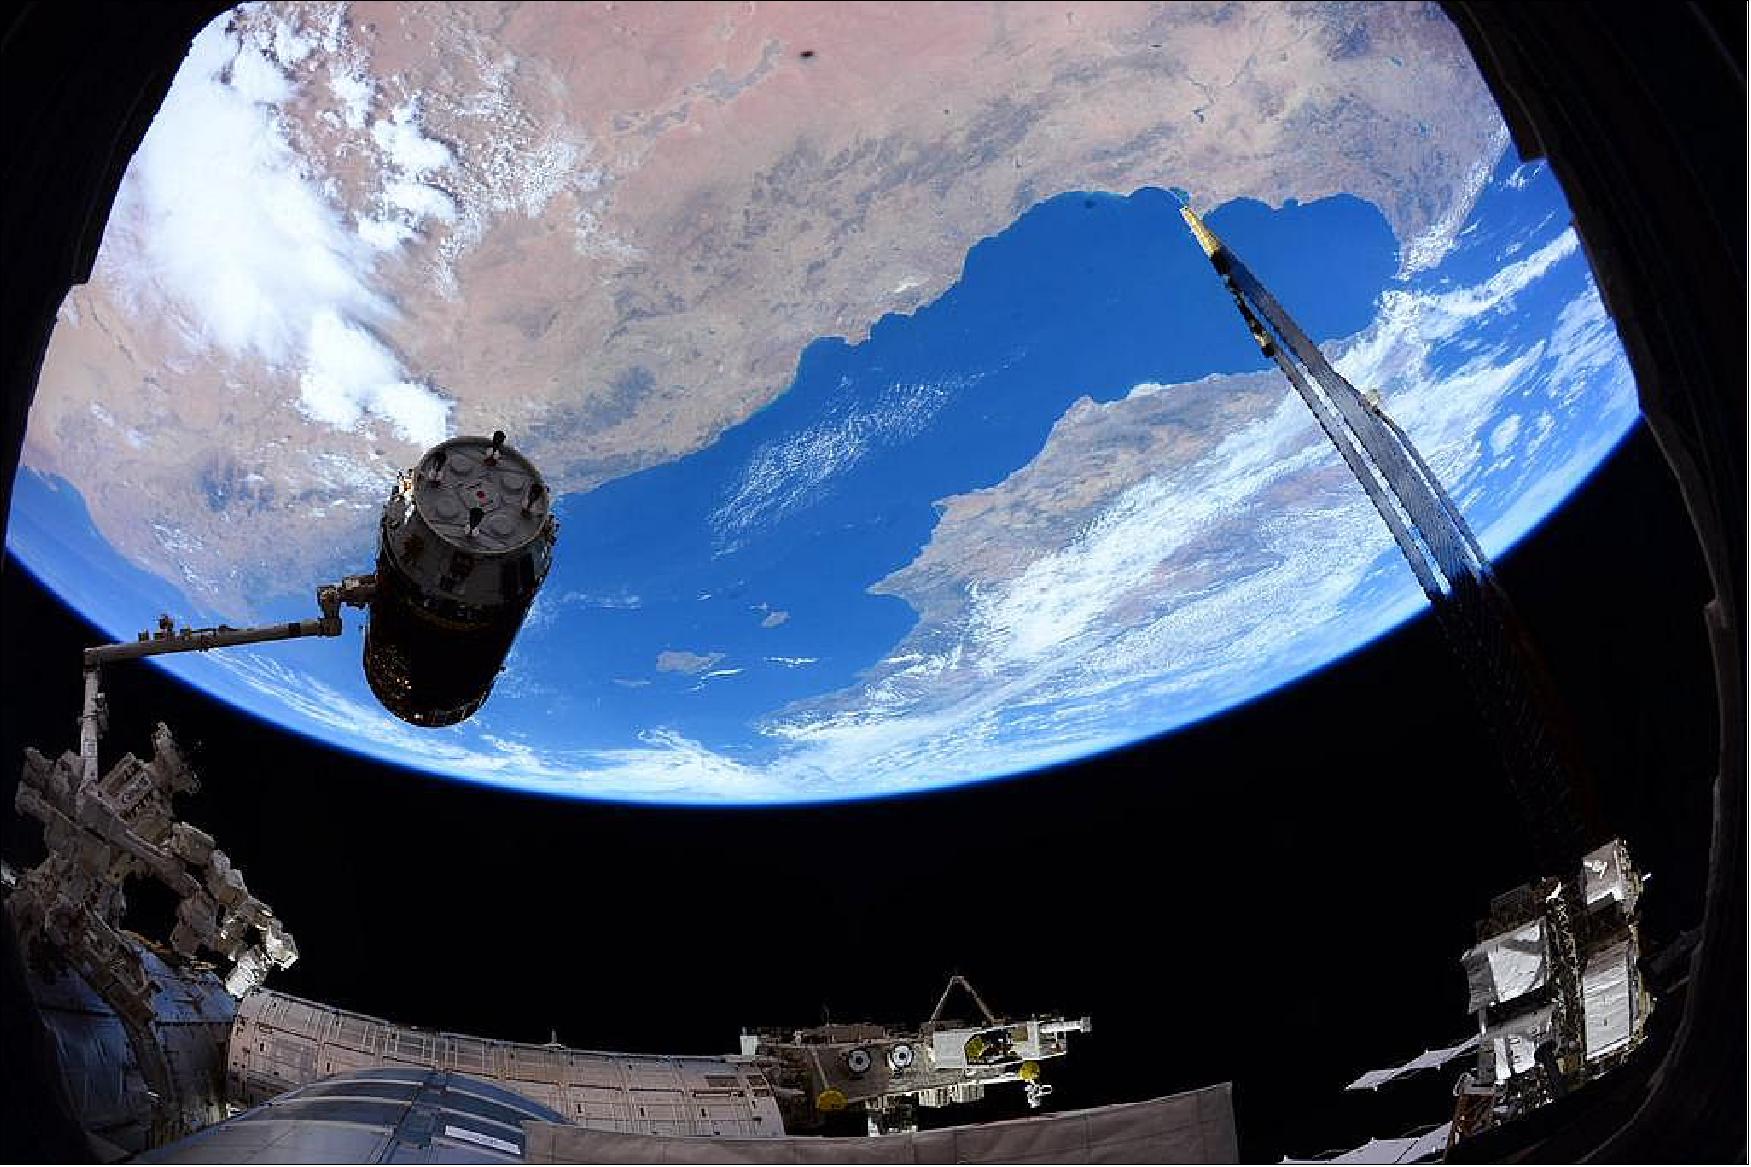 Figure 15: Photo of the HTV-5 supply ship arrival at the station and capture with Canadarm2 (image credit: NASA, John Kelly)